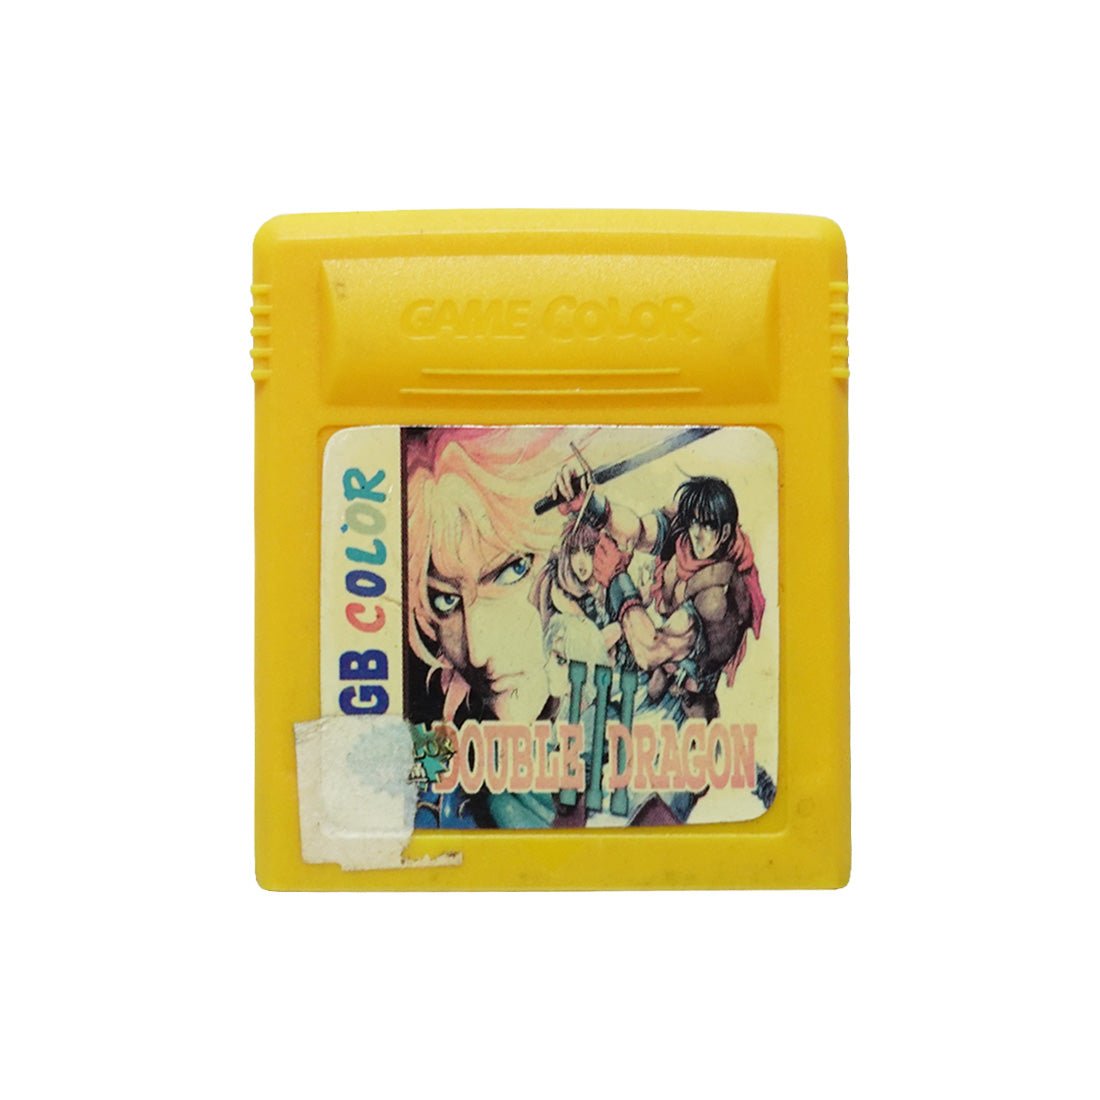 (Pre-Owned) Double Dragon - Gameboy Color - ريترو - Store 974 | ستور ٩٧٤